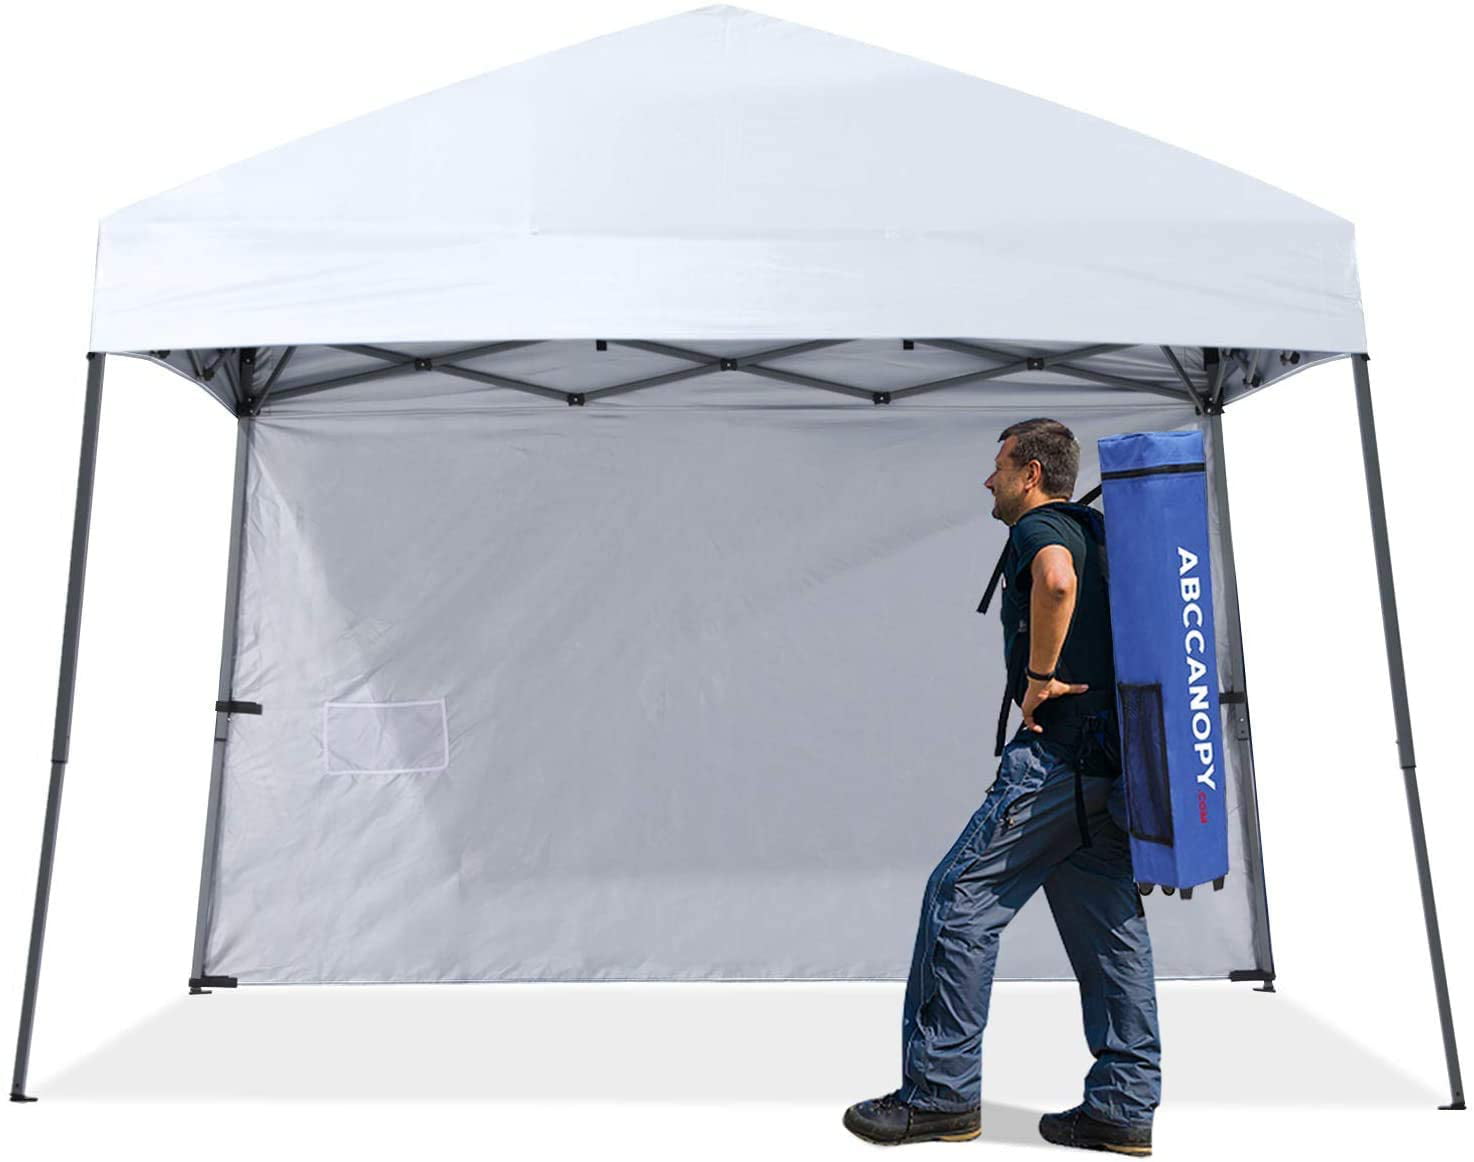 ABCCANOPY 10 ft x 10 ft Outdoor Pop up Slant Leg Canopy Tent with 1 Sun Wall and 1 Backpack Bag - White